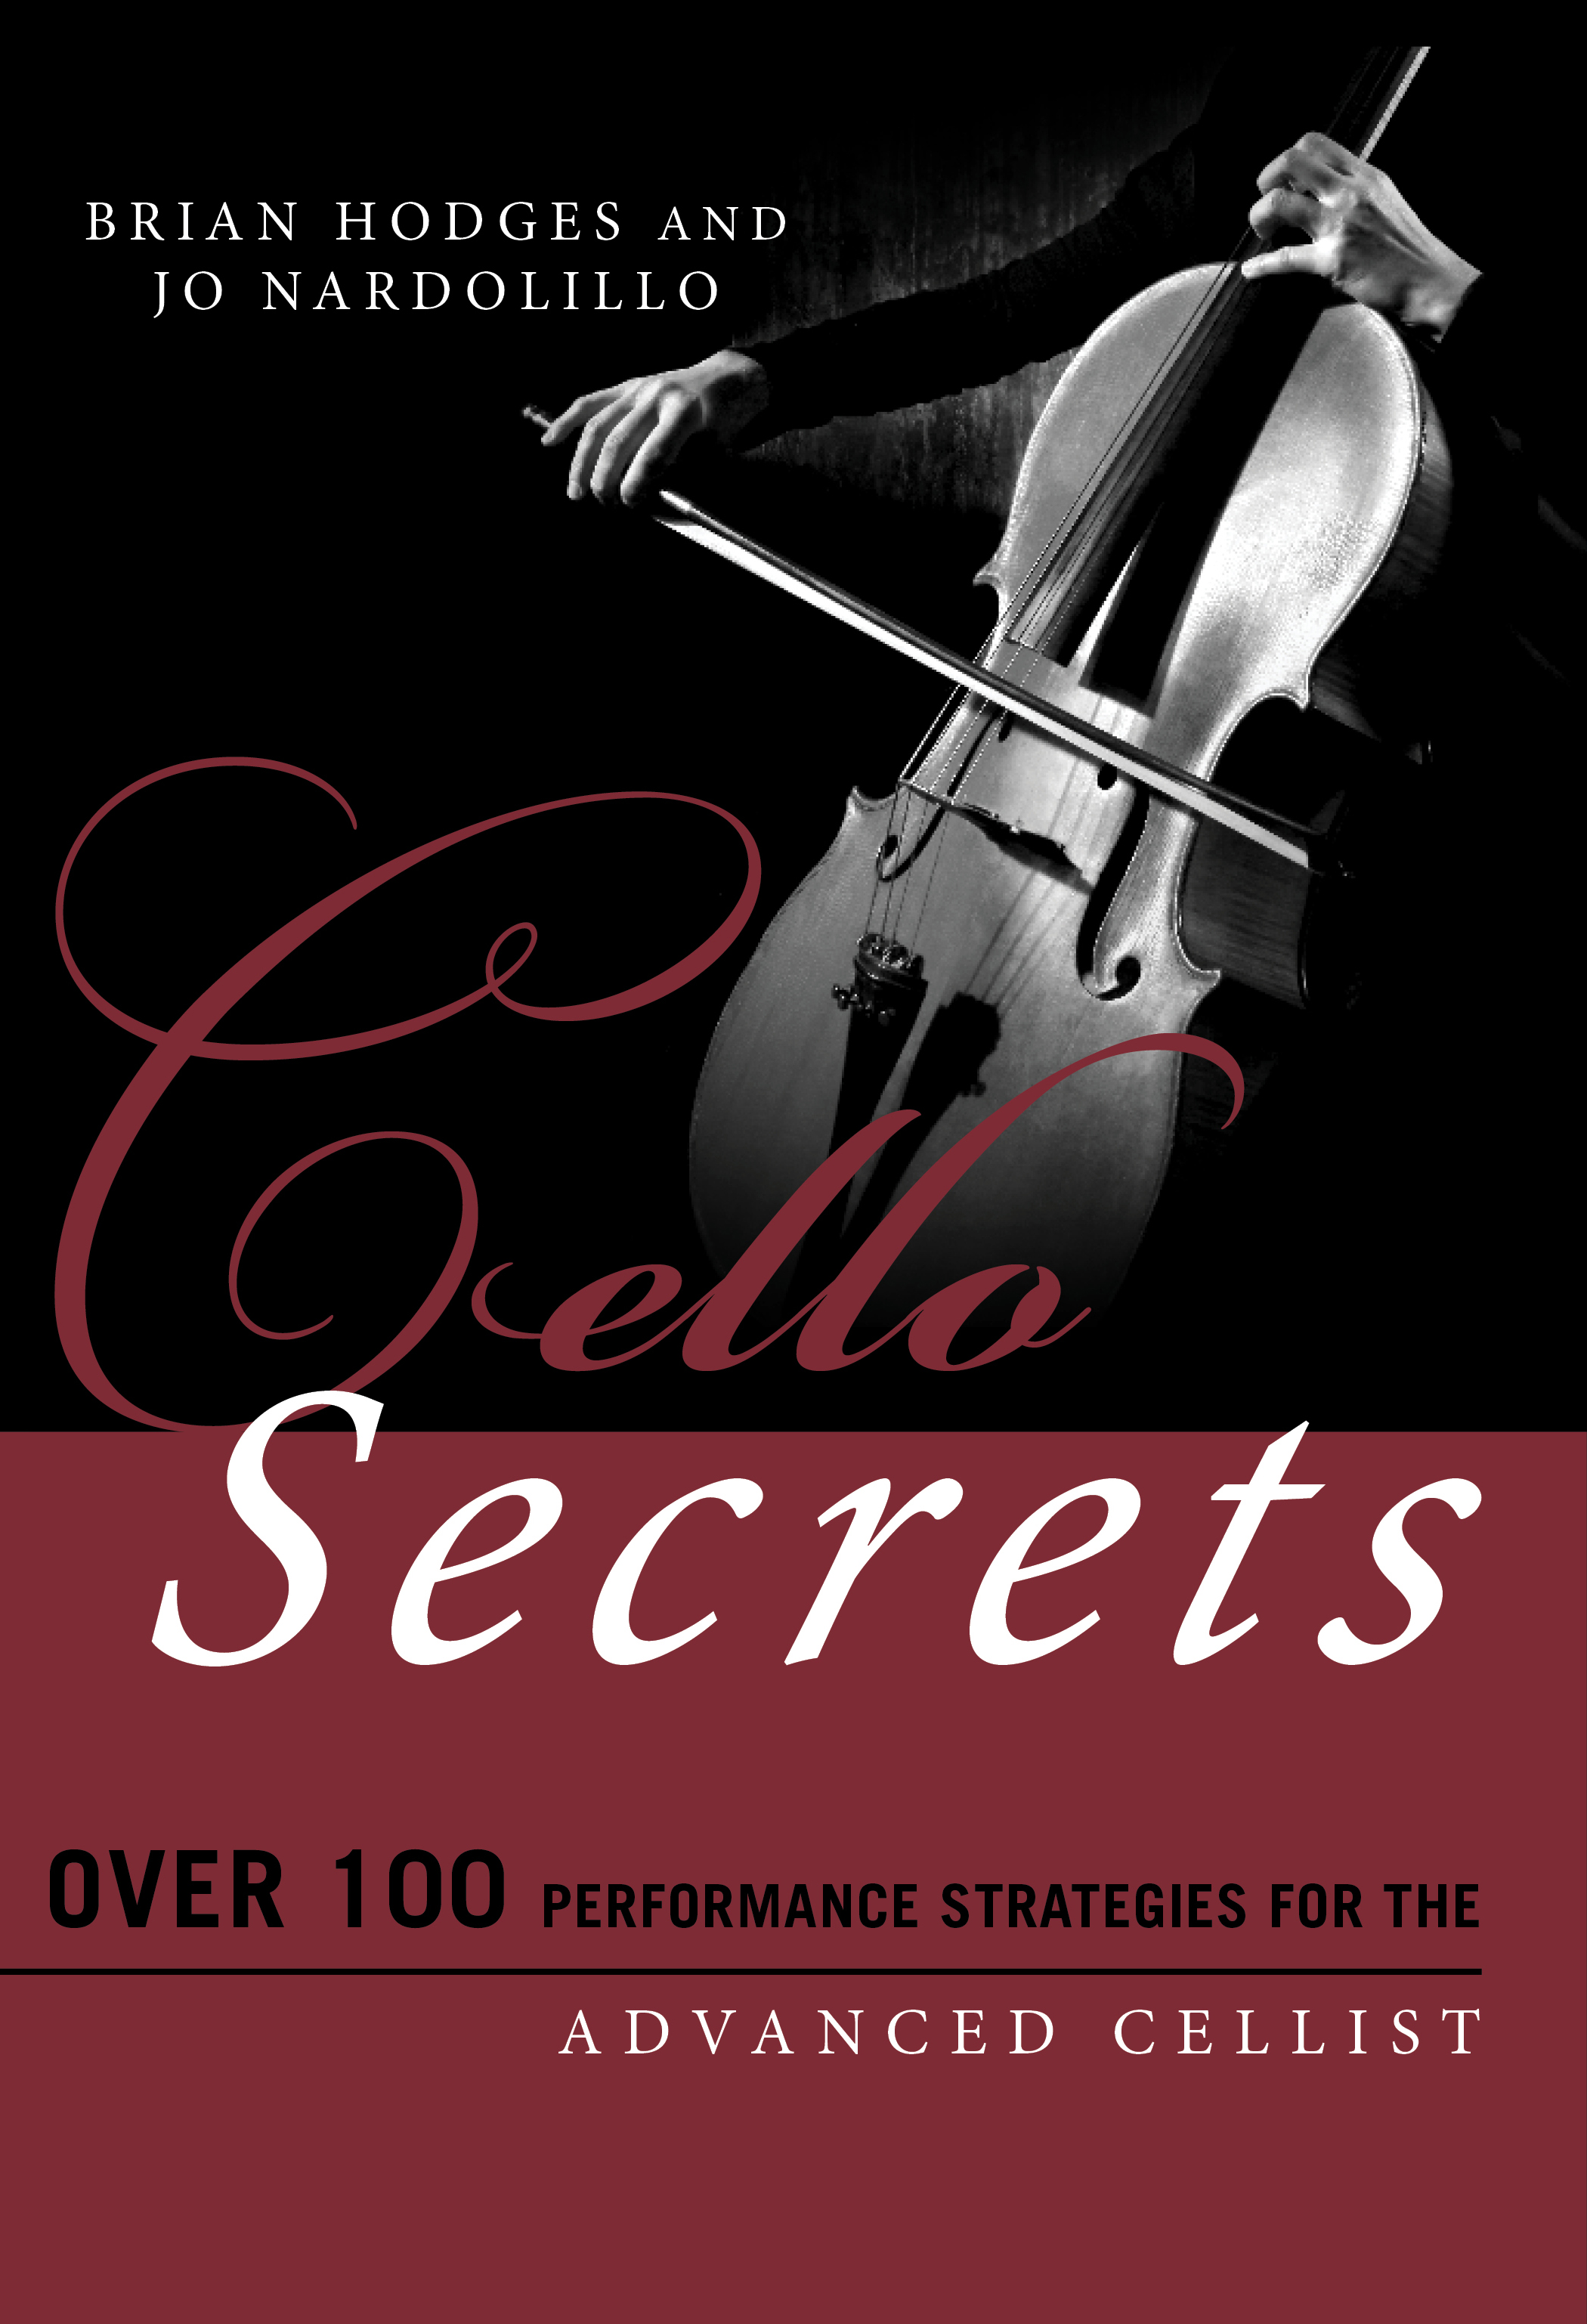 Book cover of Cello Secrets by Brian Hodges